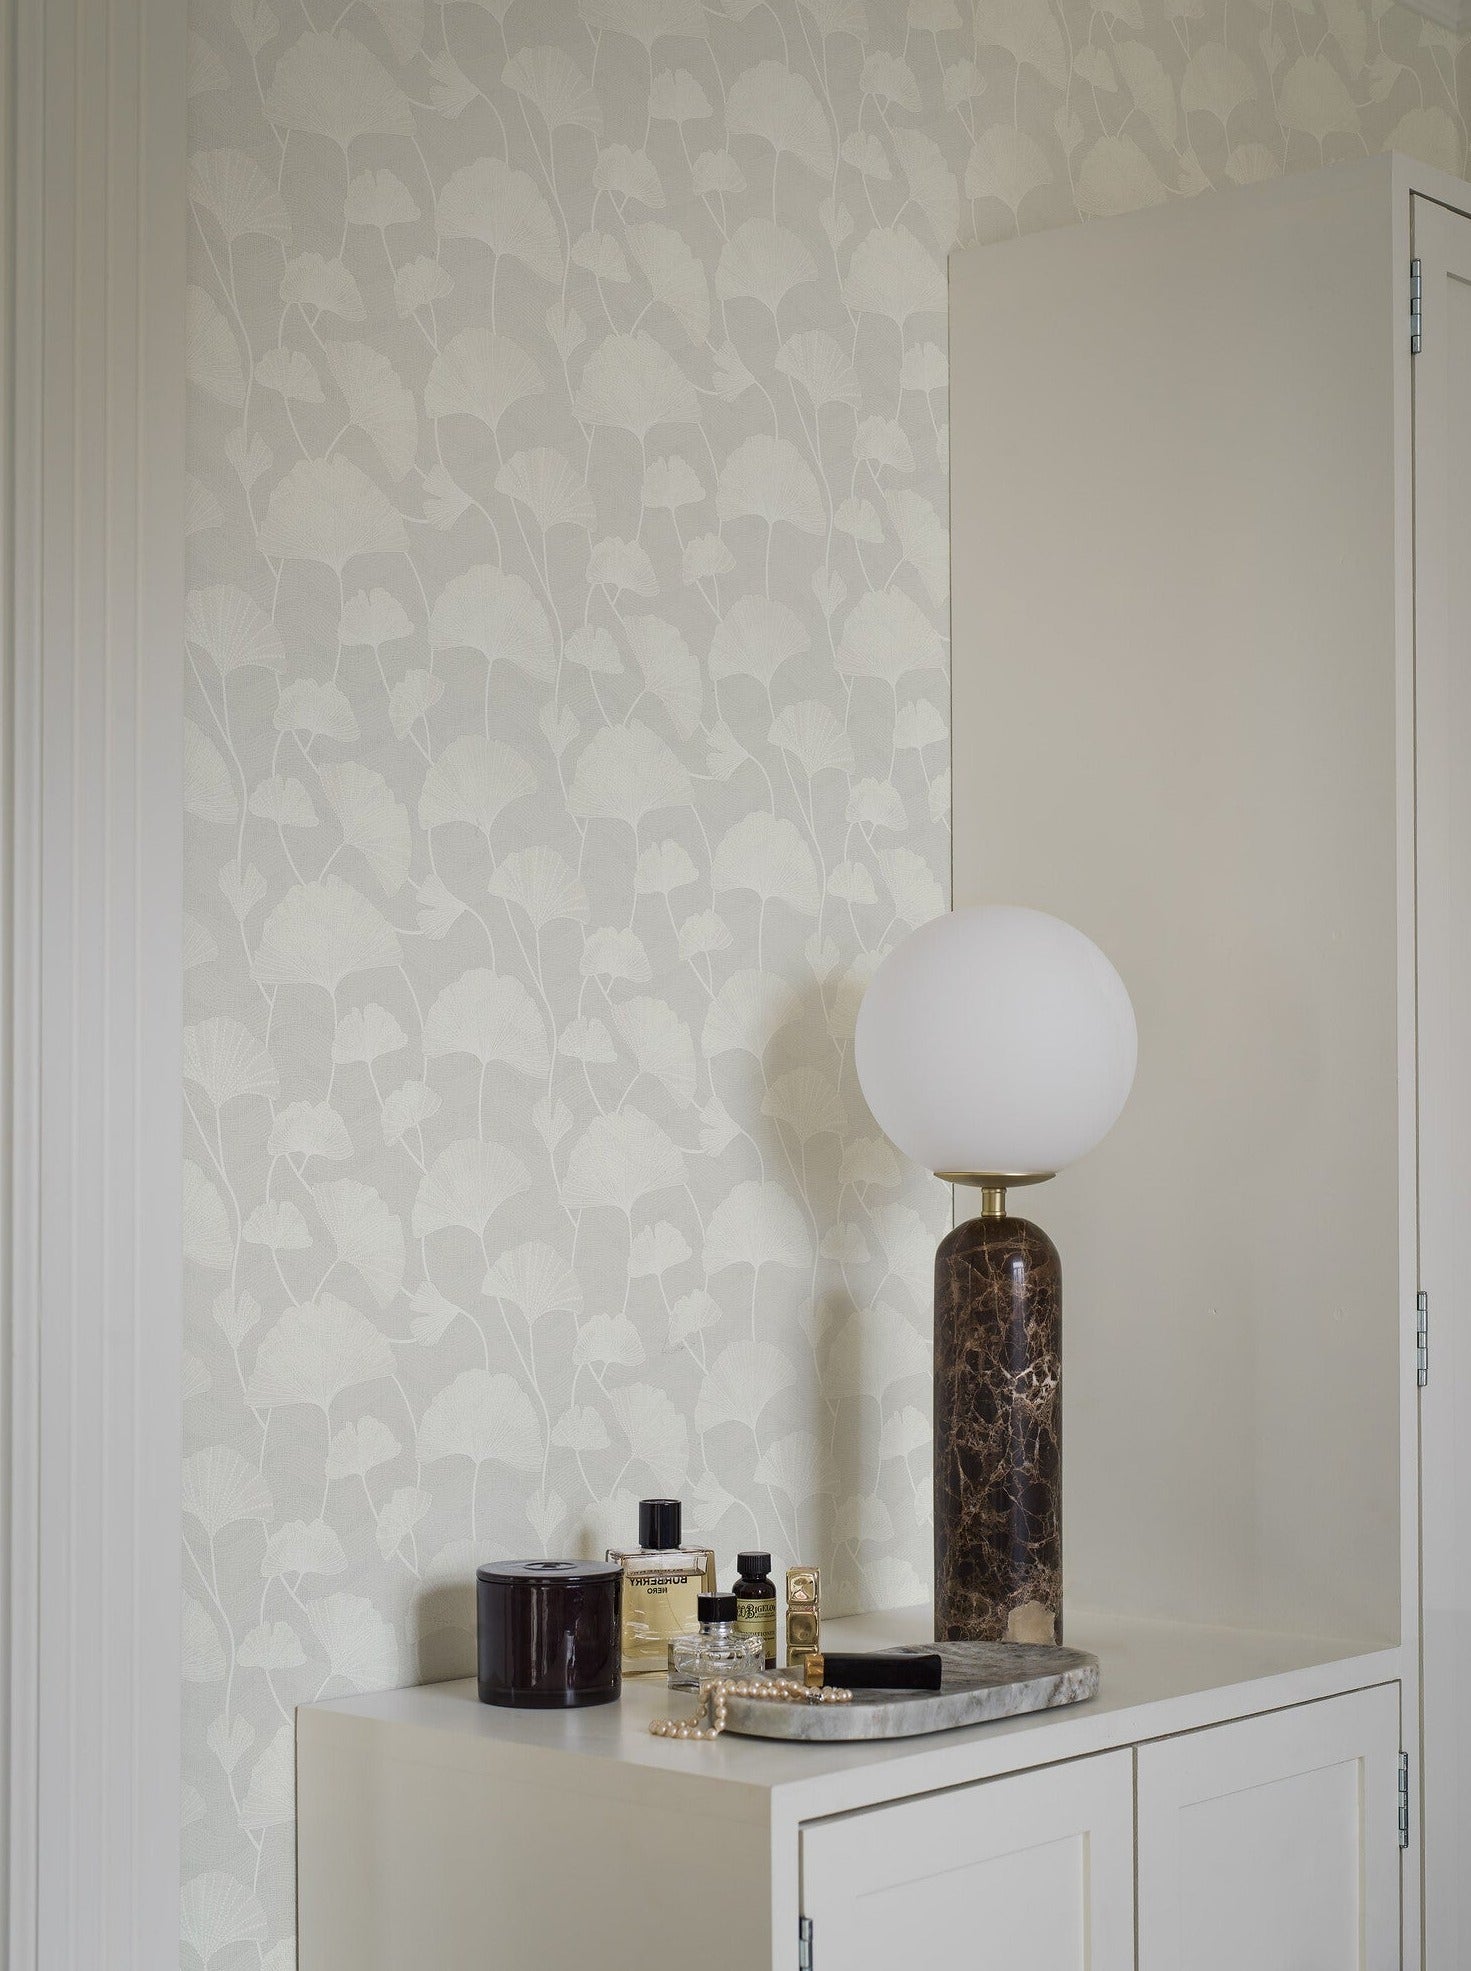 Colored in contrasting tones of white with elements that shimmer in the light, our Sophia wallpaper is exudes soothing vibes.